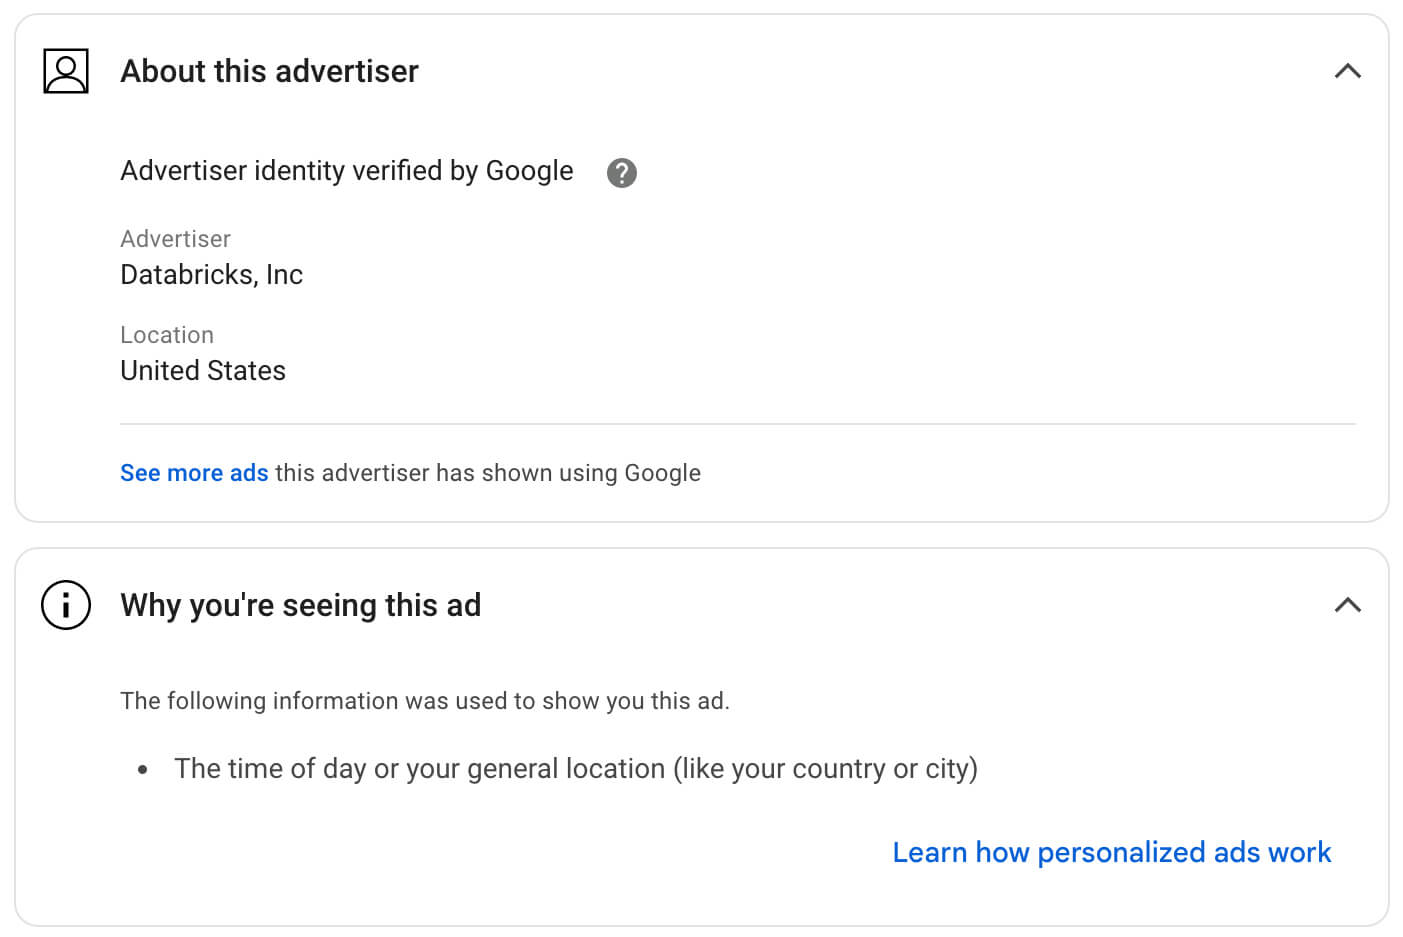 google-ads-transparency-center-about-this-advertiser-identity-databricks-inc-targeting-data-generic-youtube-10